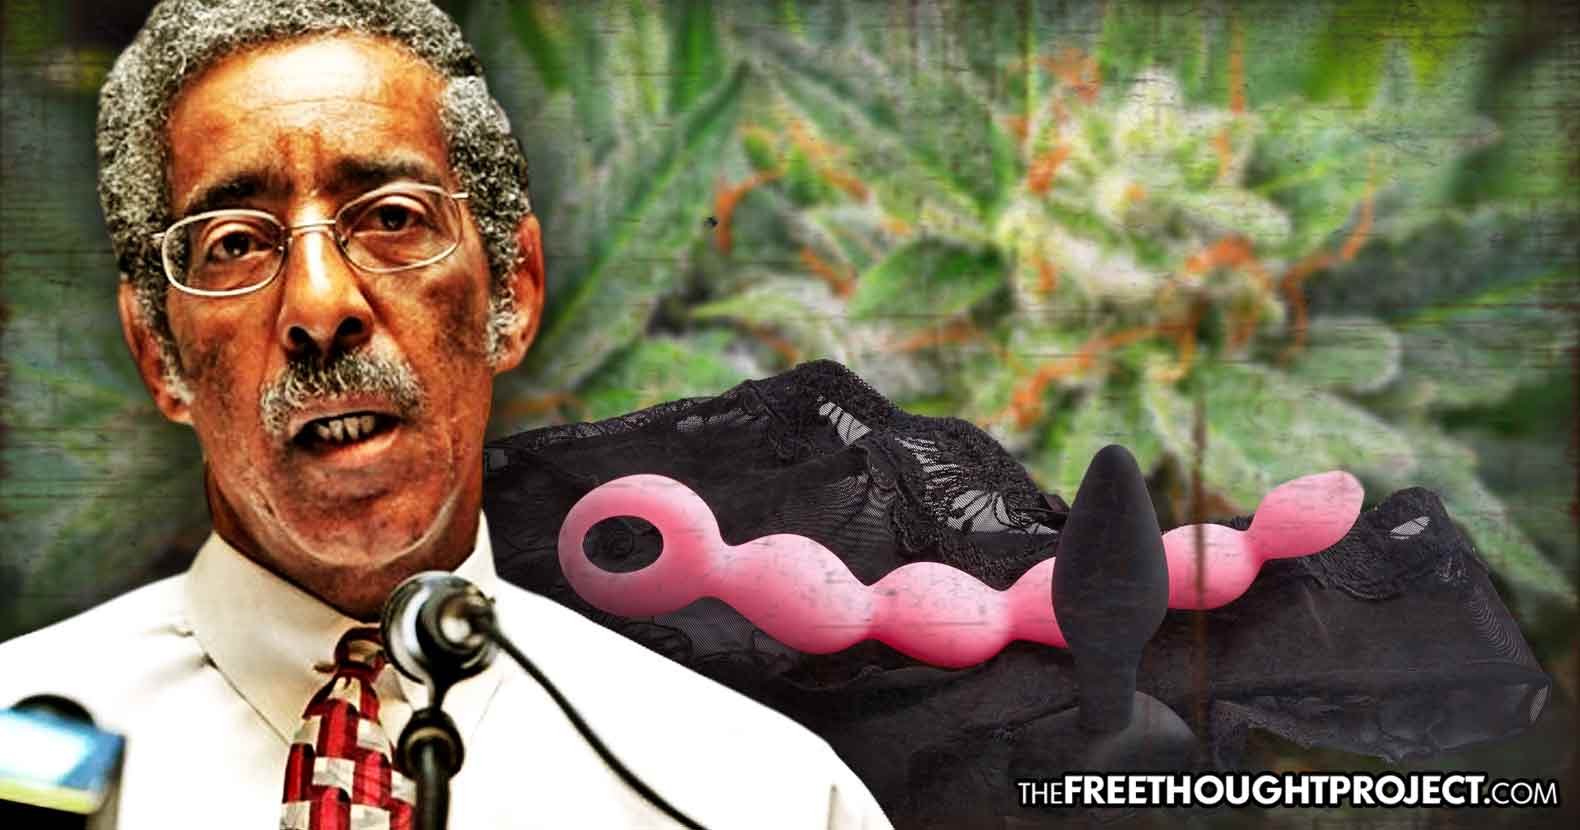 Lawmaker Warns Legalizing Cannabis Will Make Dealers Sell "Sex Toys" to Upper-Class White People